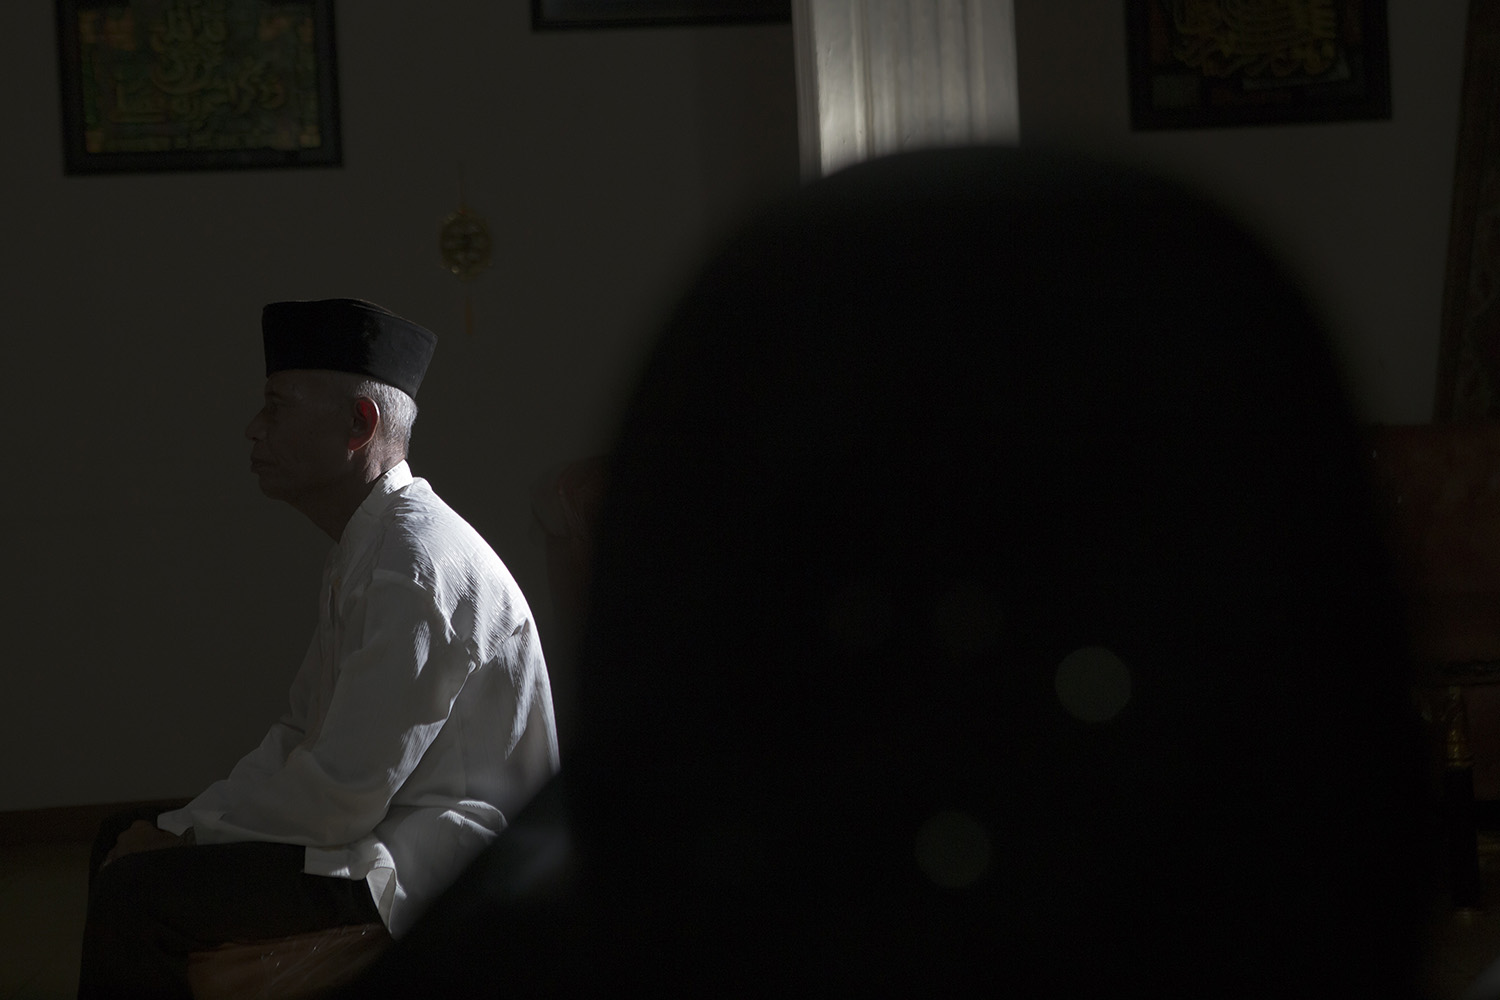 When he’s not teaching silat, Imam spends evenings in silence to train his senses. JP/Ramadhani